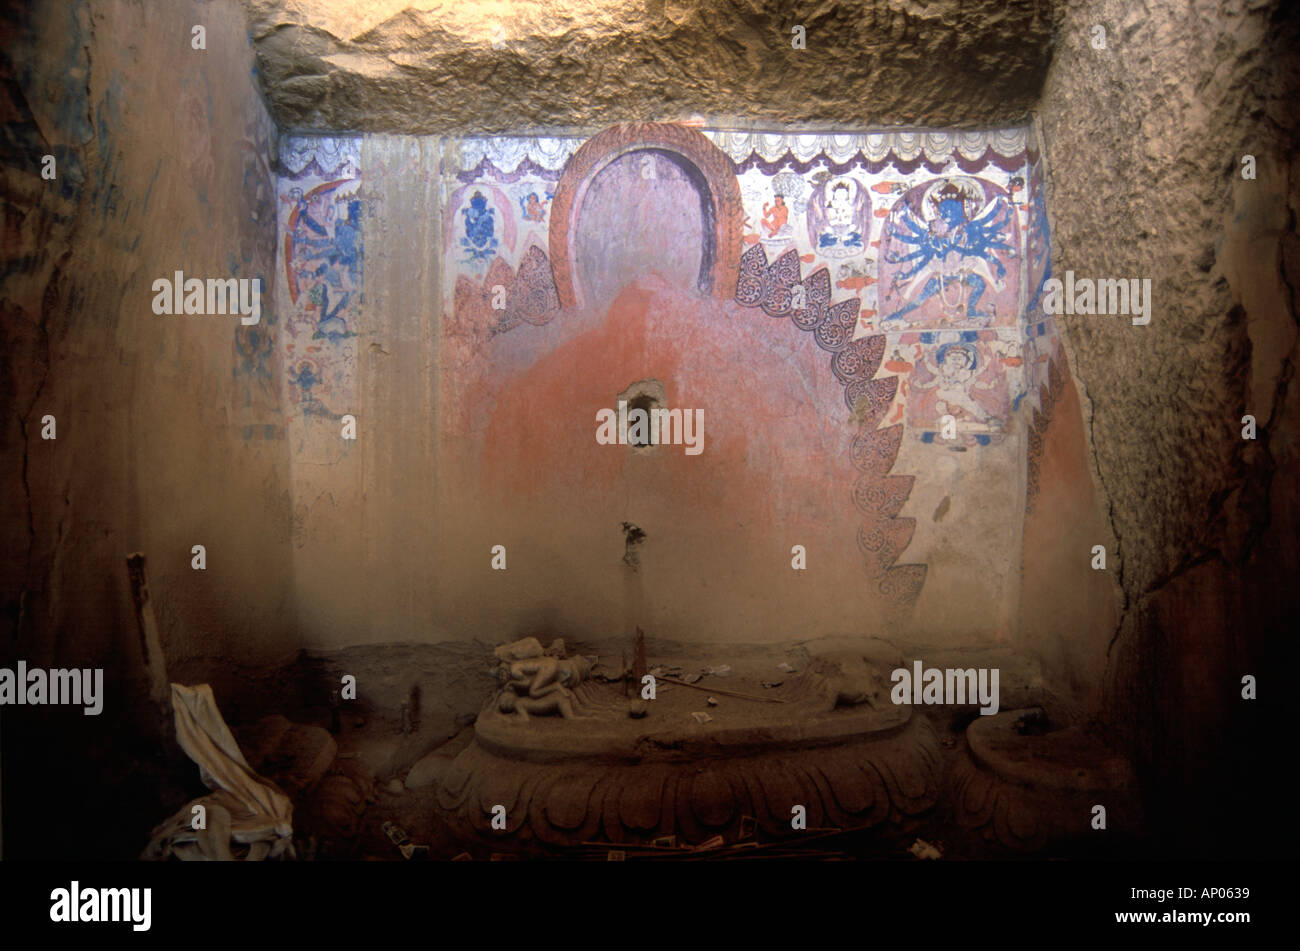 BUDDHIST MURALS destroyed STATUE at TSAPARANG 10th C GUGE KINGDOM west of MOUNT KAILASH TIBET Stock Photo